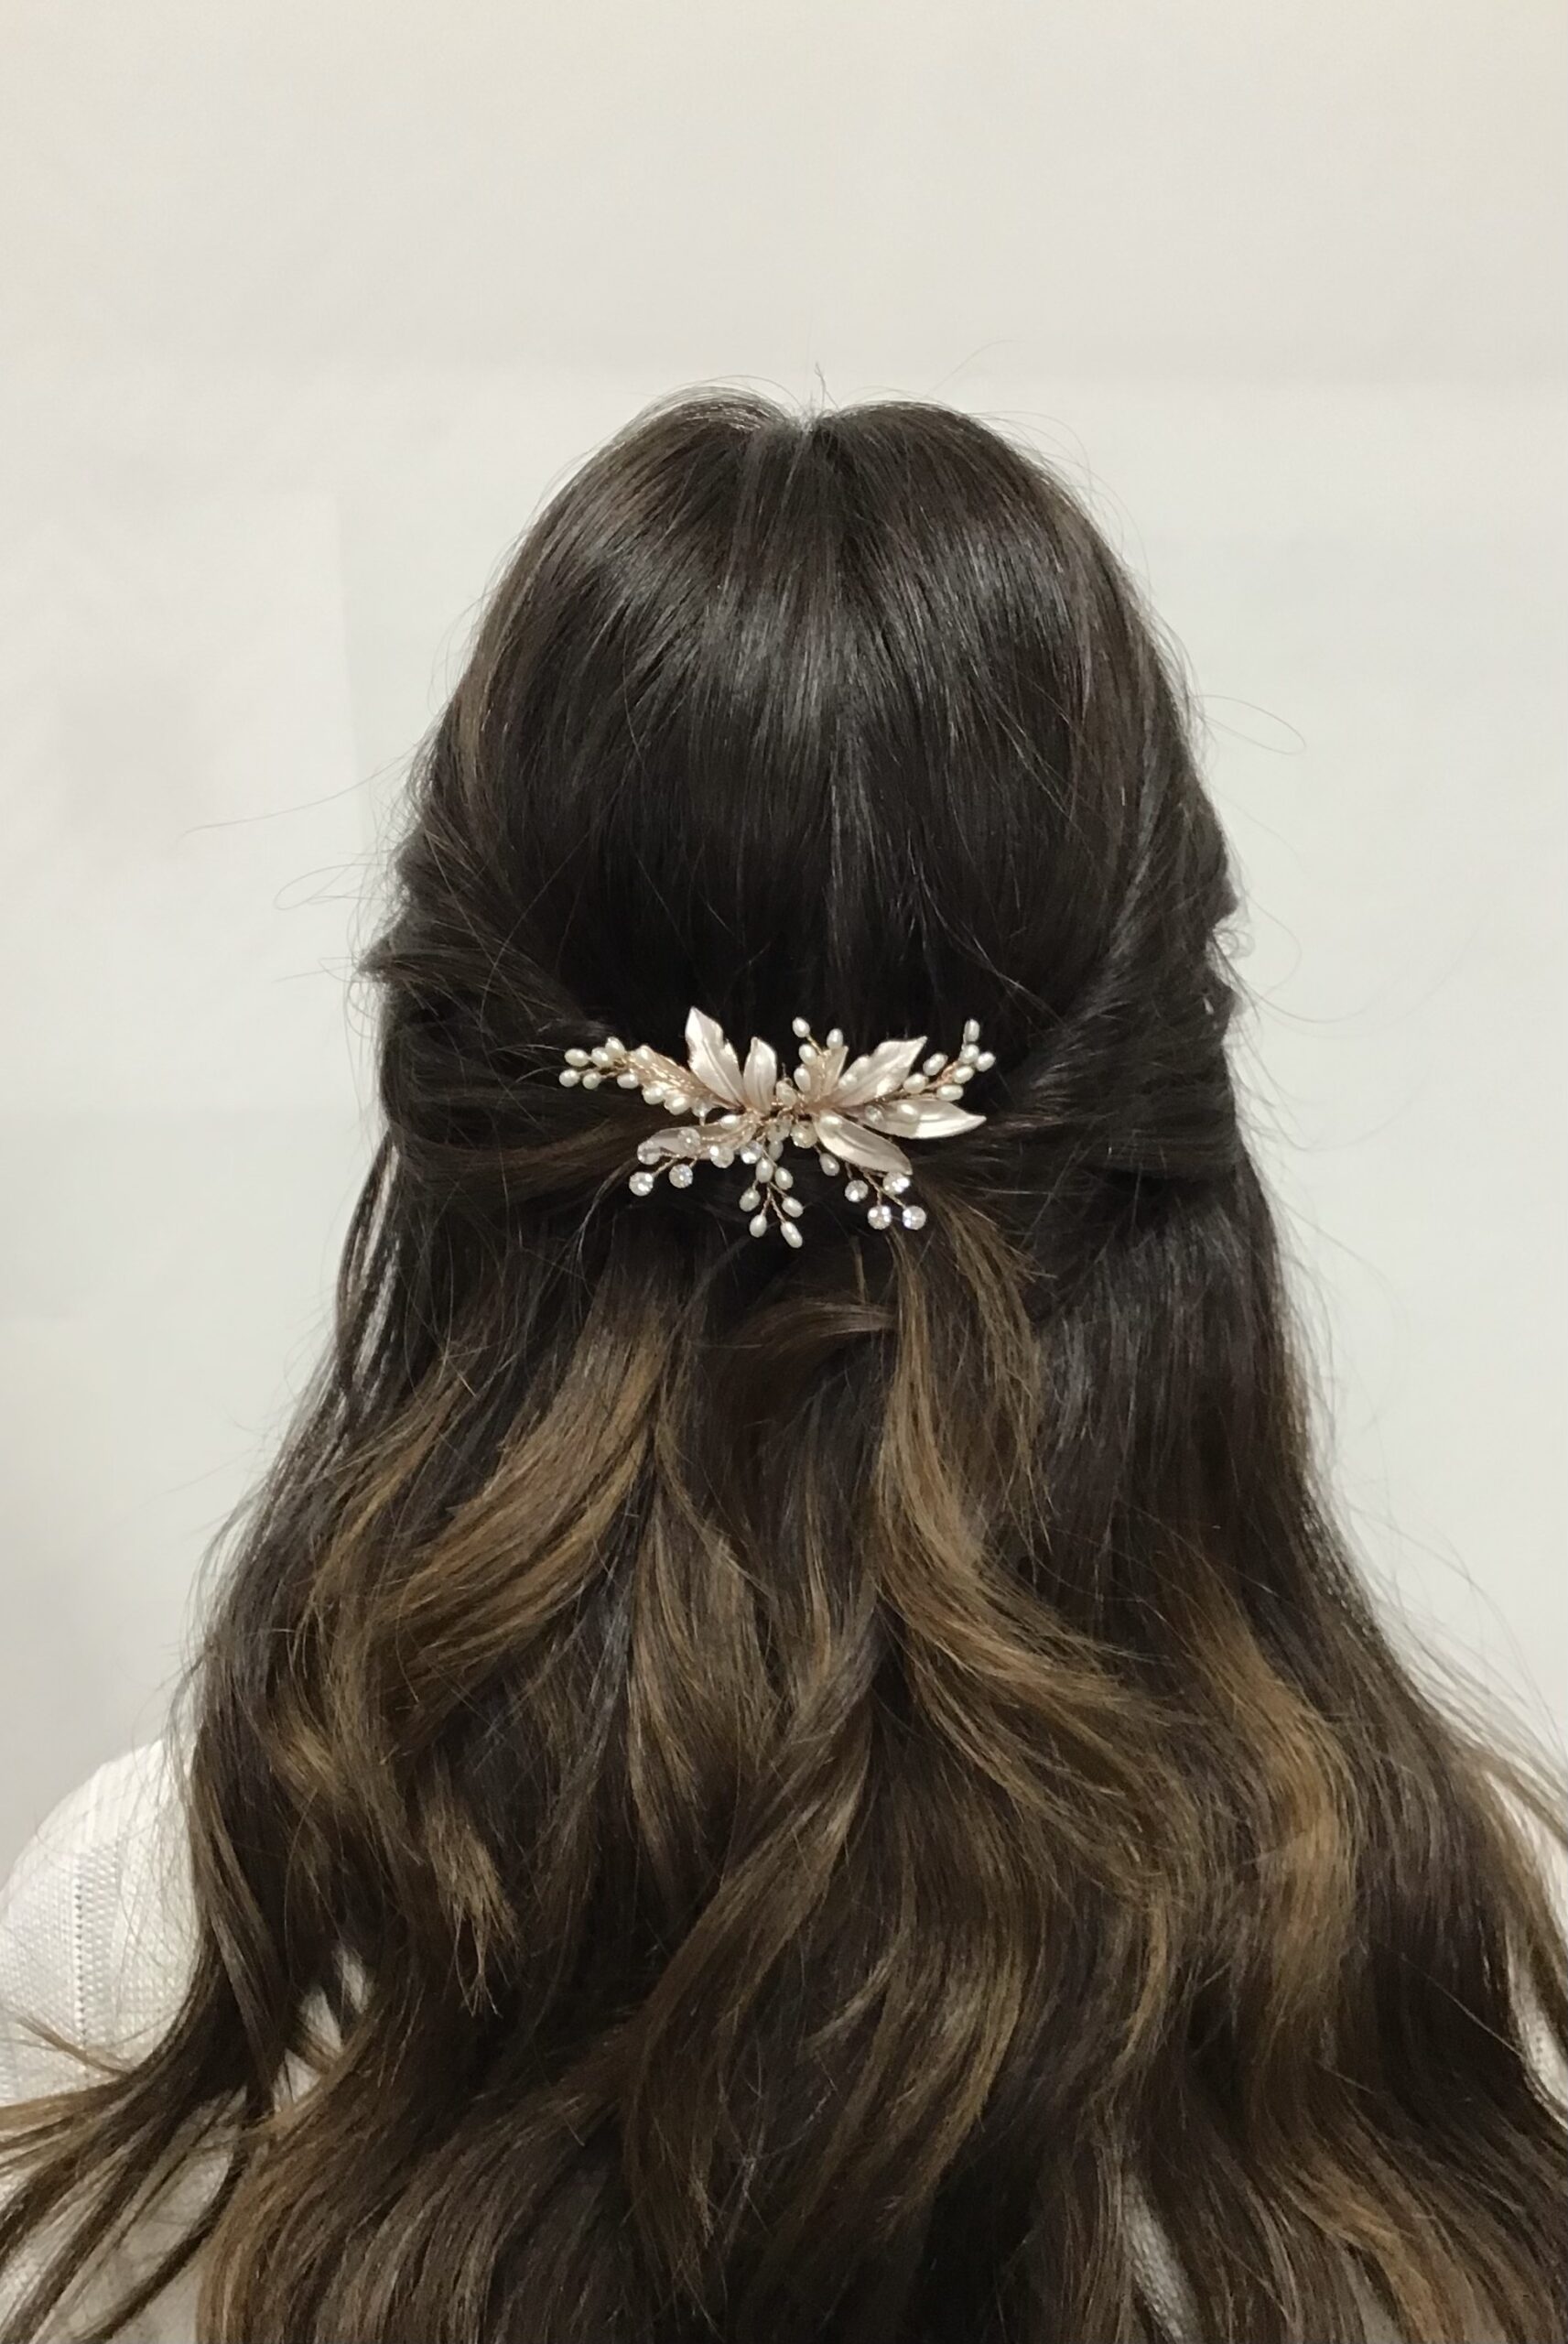 Hair Comb Accessory|Rosella|Jeanette Maree|Shop Online Now